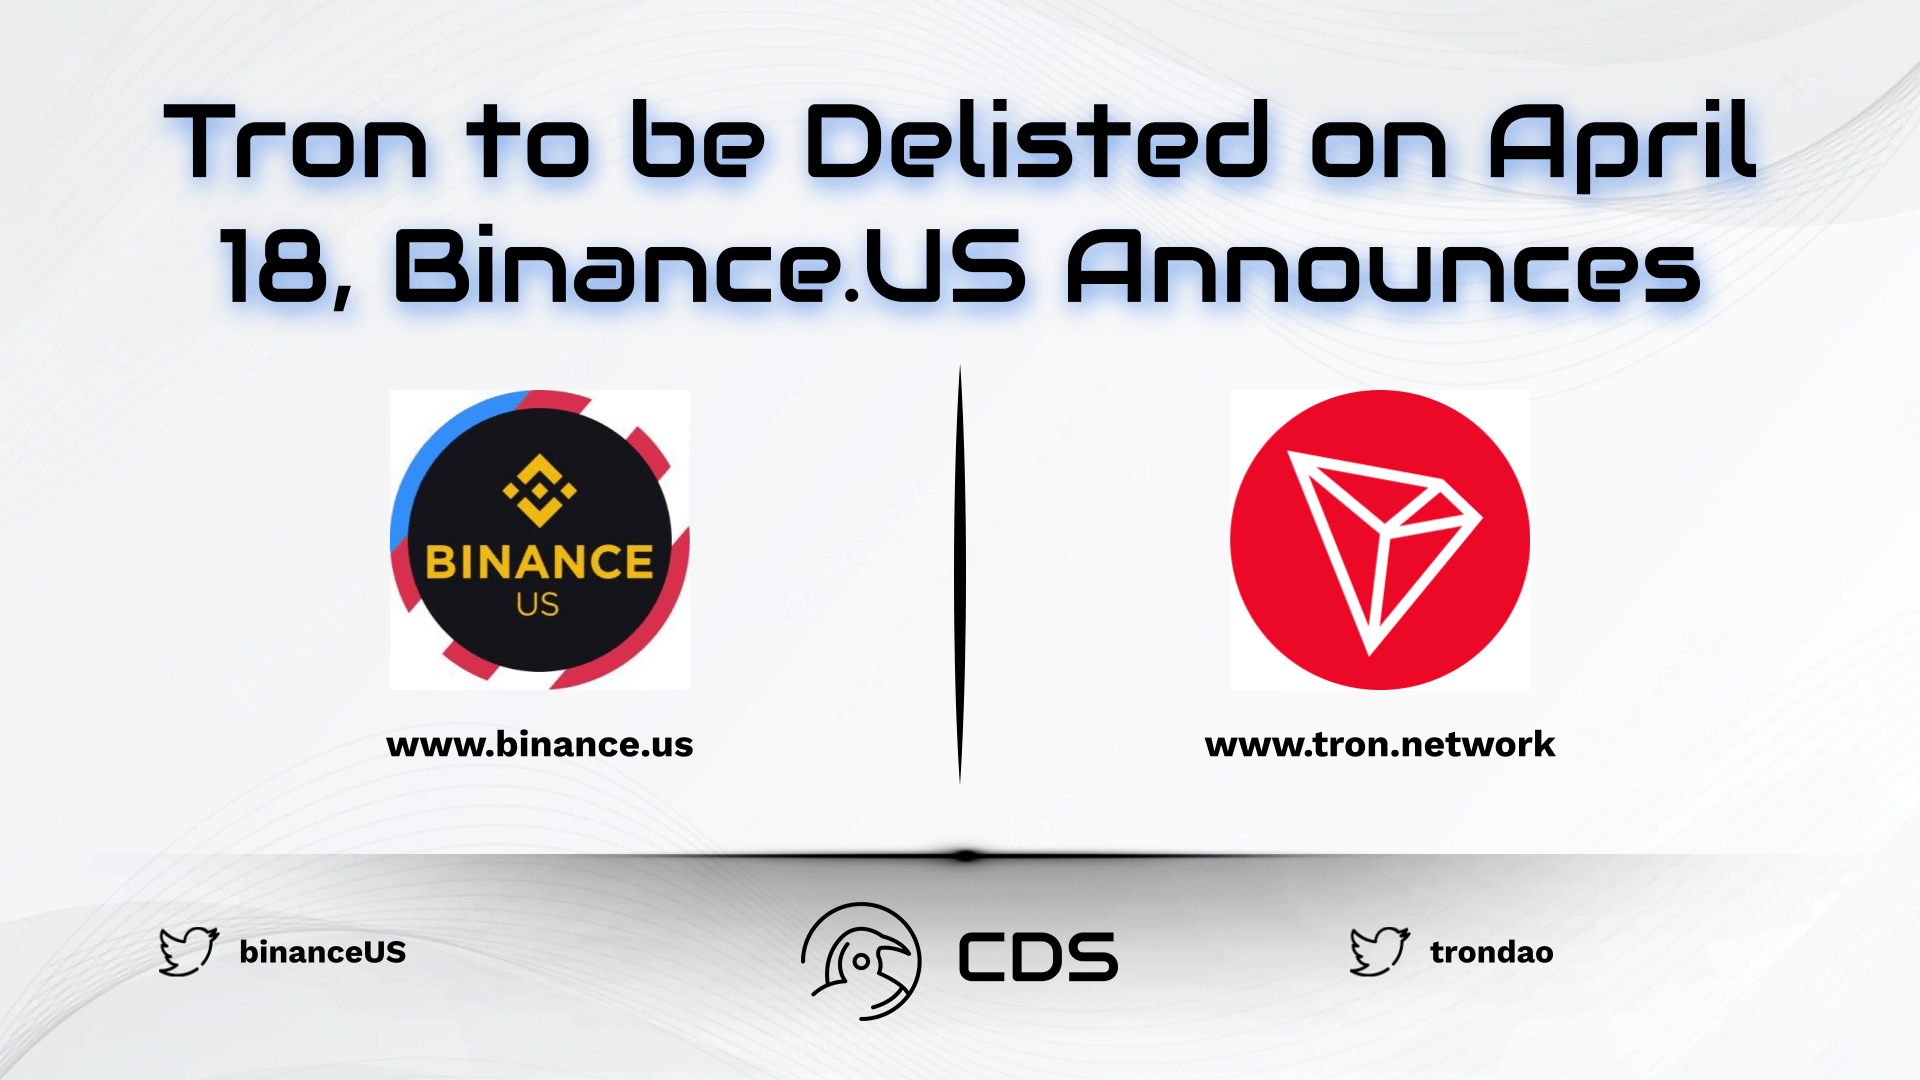 Tron to be Delisted on April 18, Binance.US Announces